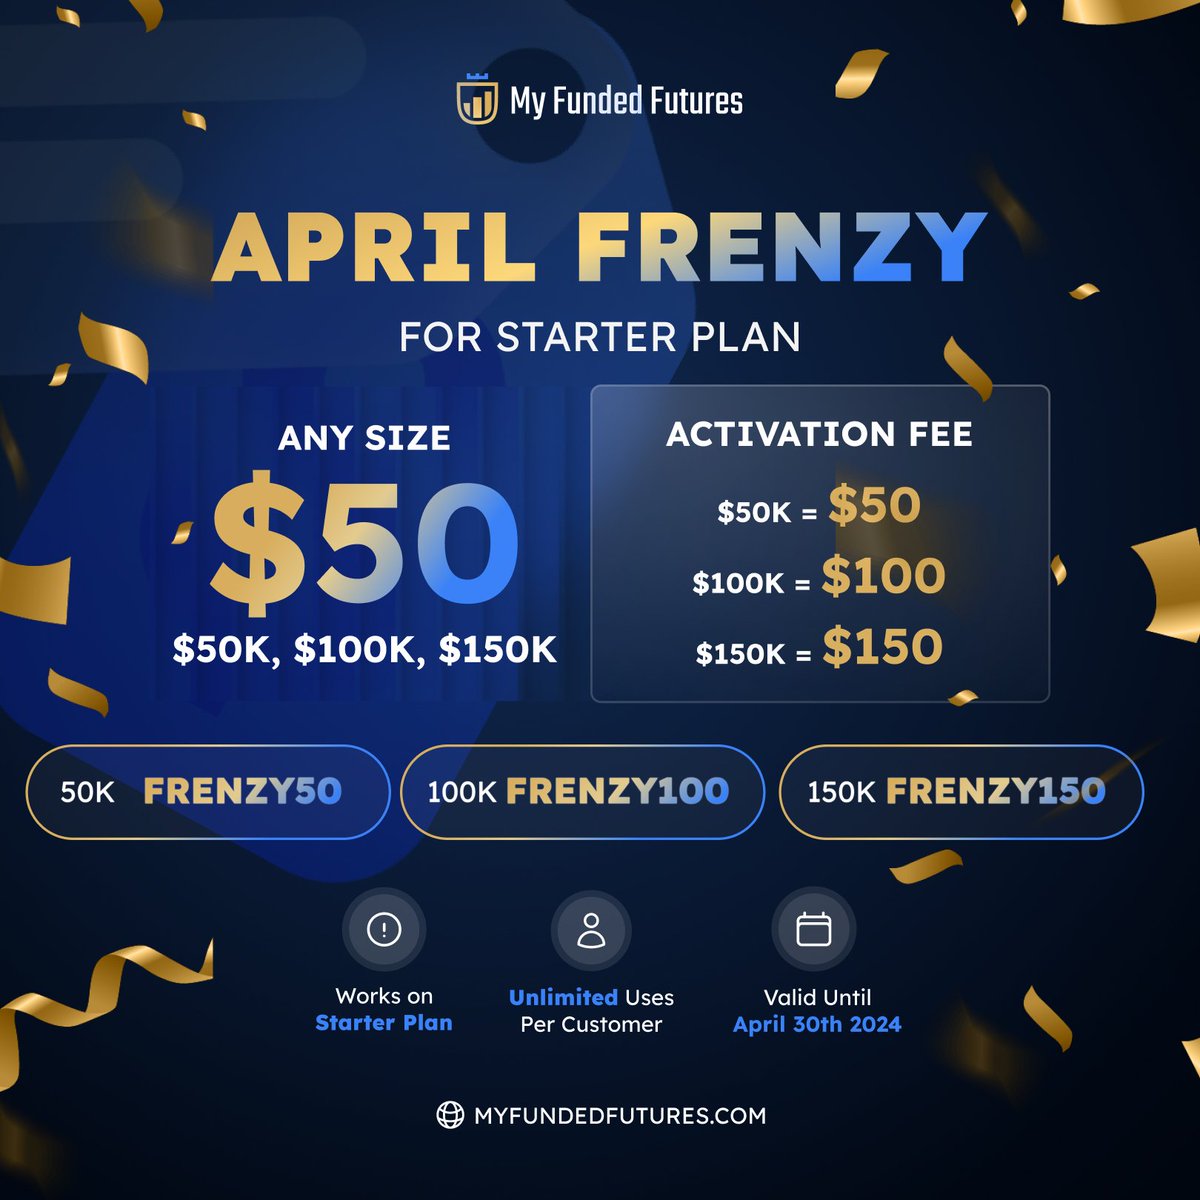 🚨ENDS TONIGHT🚨 

All @MyFundedFutures starter plans  just $50 this month regardless of size! This makes MFFU one of the cheapest options out there. Highly recommend this deal

bit.ly/motmffu
Codes: FRENZY50 FRENZY100 FRENZY150

#futures #propfirm #propfirms